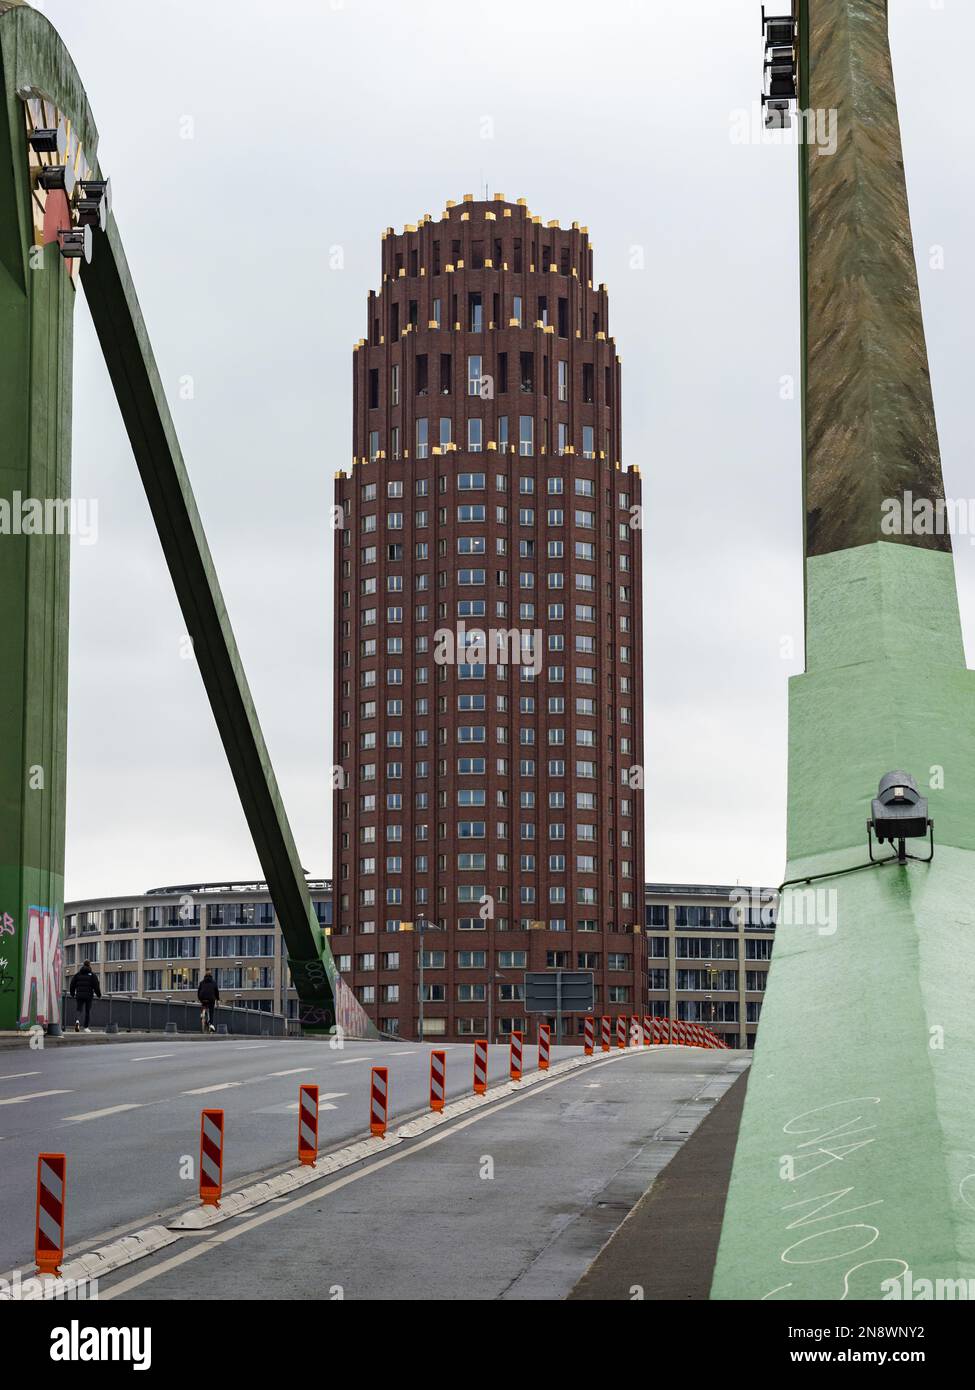 Main Plaza tower building viewed from the bridge 'Flößerbrücke'. High rise landmark with a red brick wall facade. Skyscraper in the southern part . Stock Photo